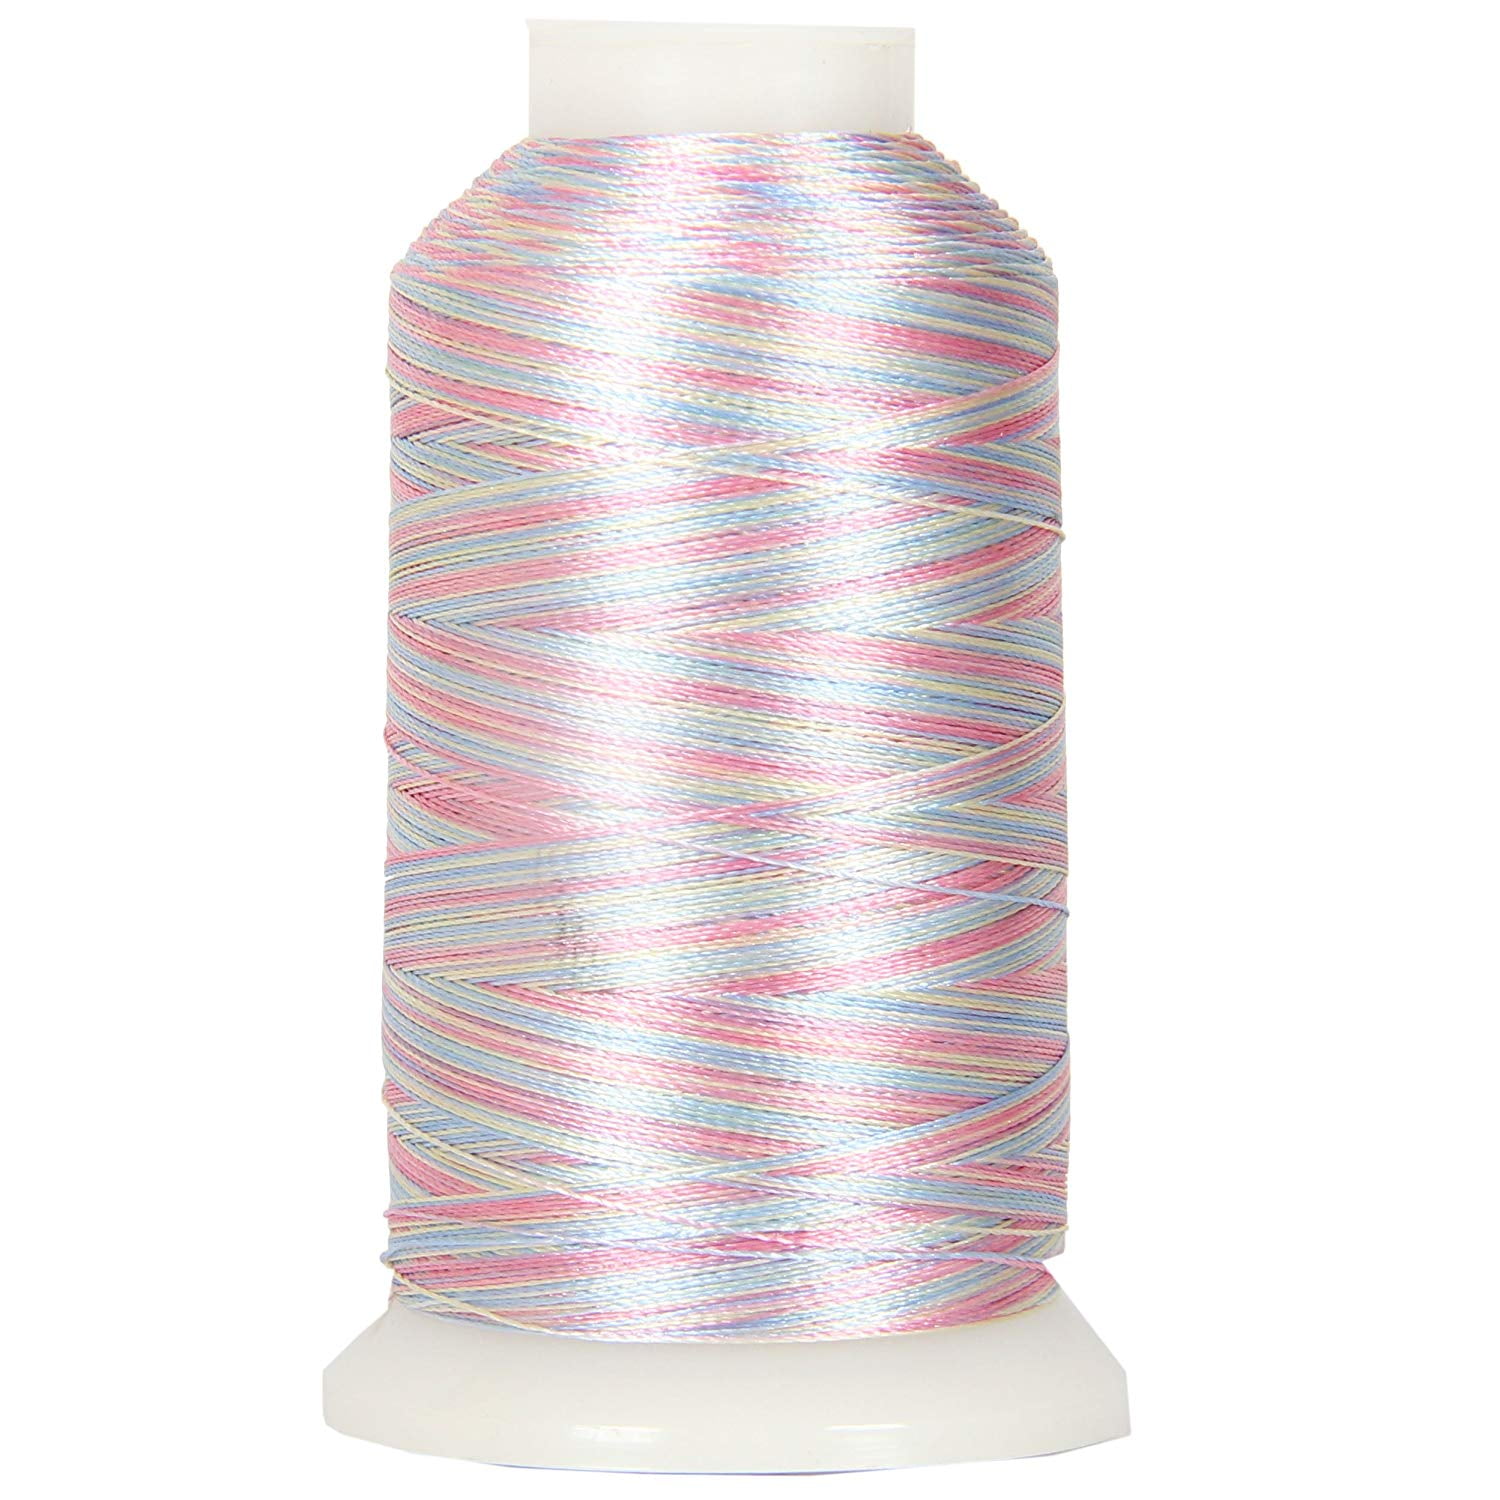 Threadart Variegated Polyester Embroidery Thread Set - 8 Tonal Colors -  40wt - 1000m Cones - 5 Sets Available